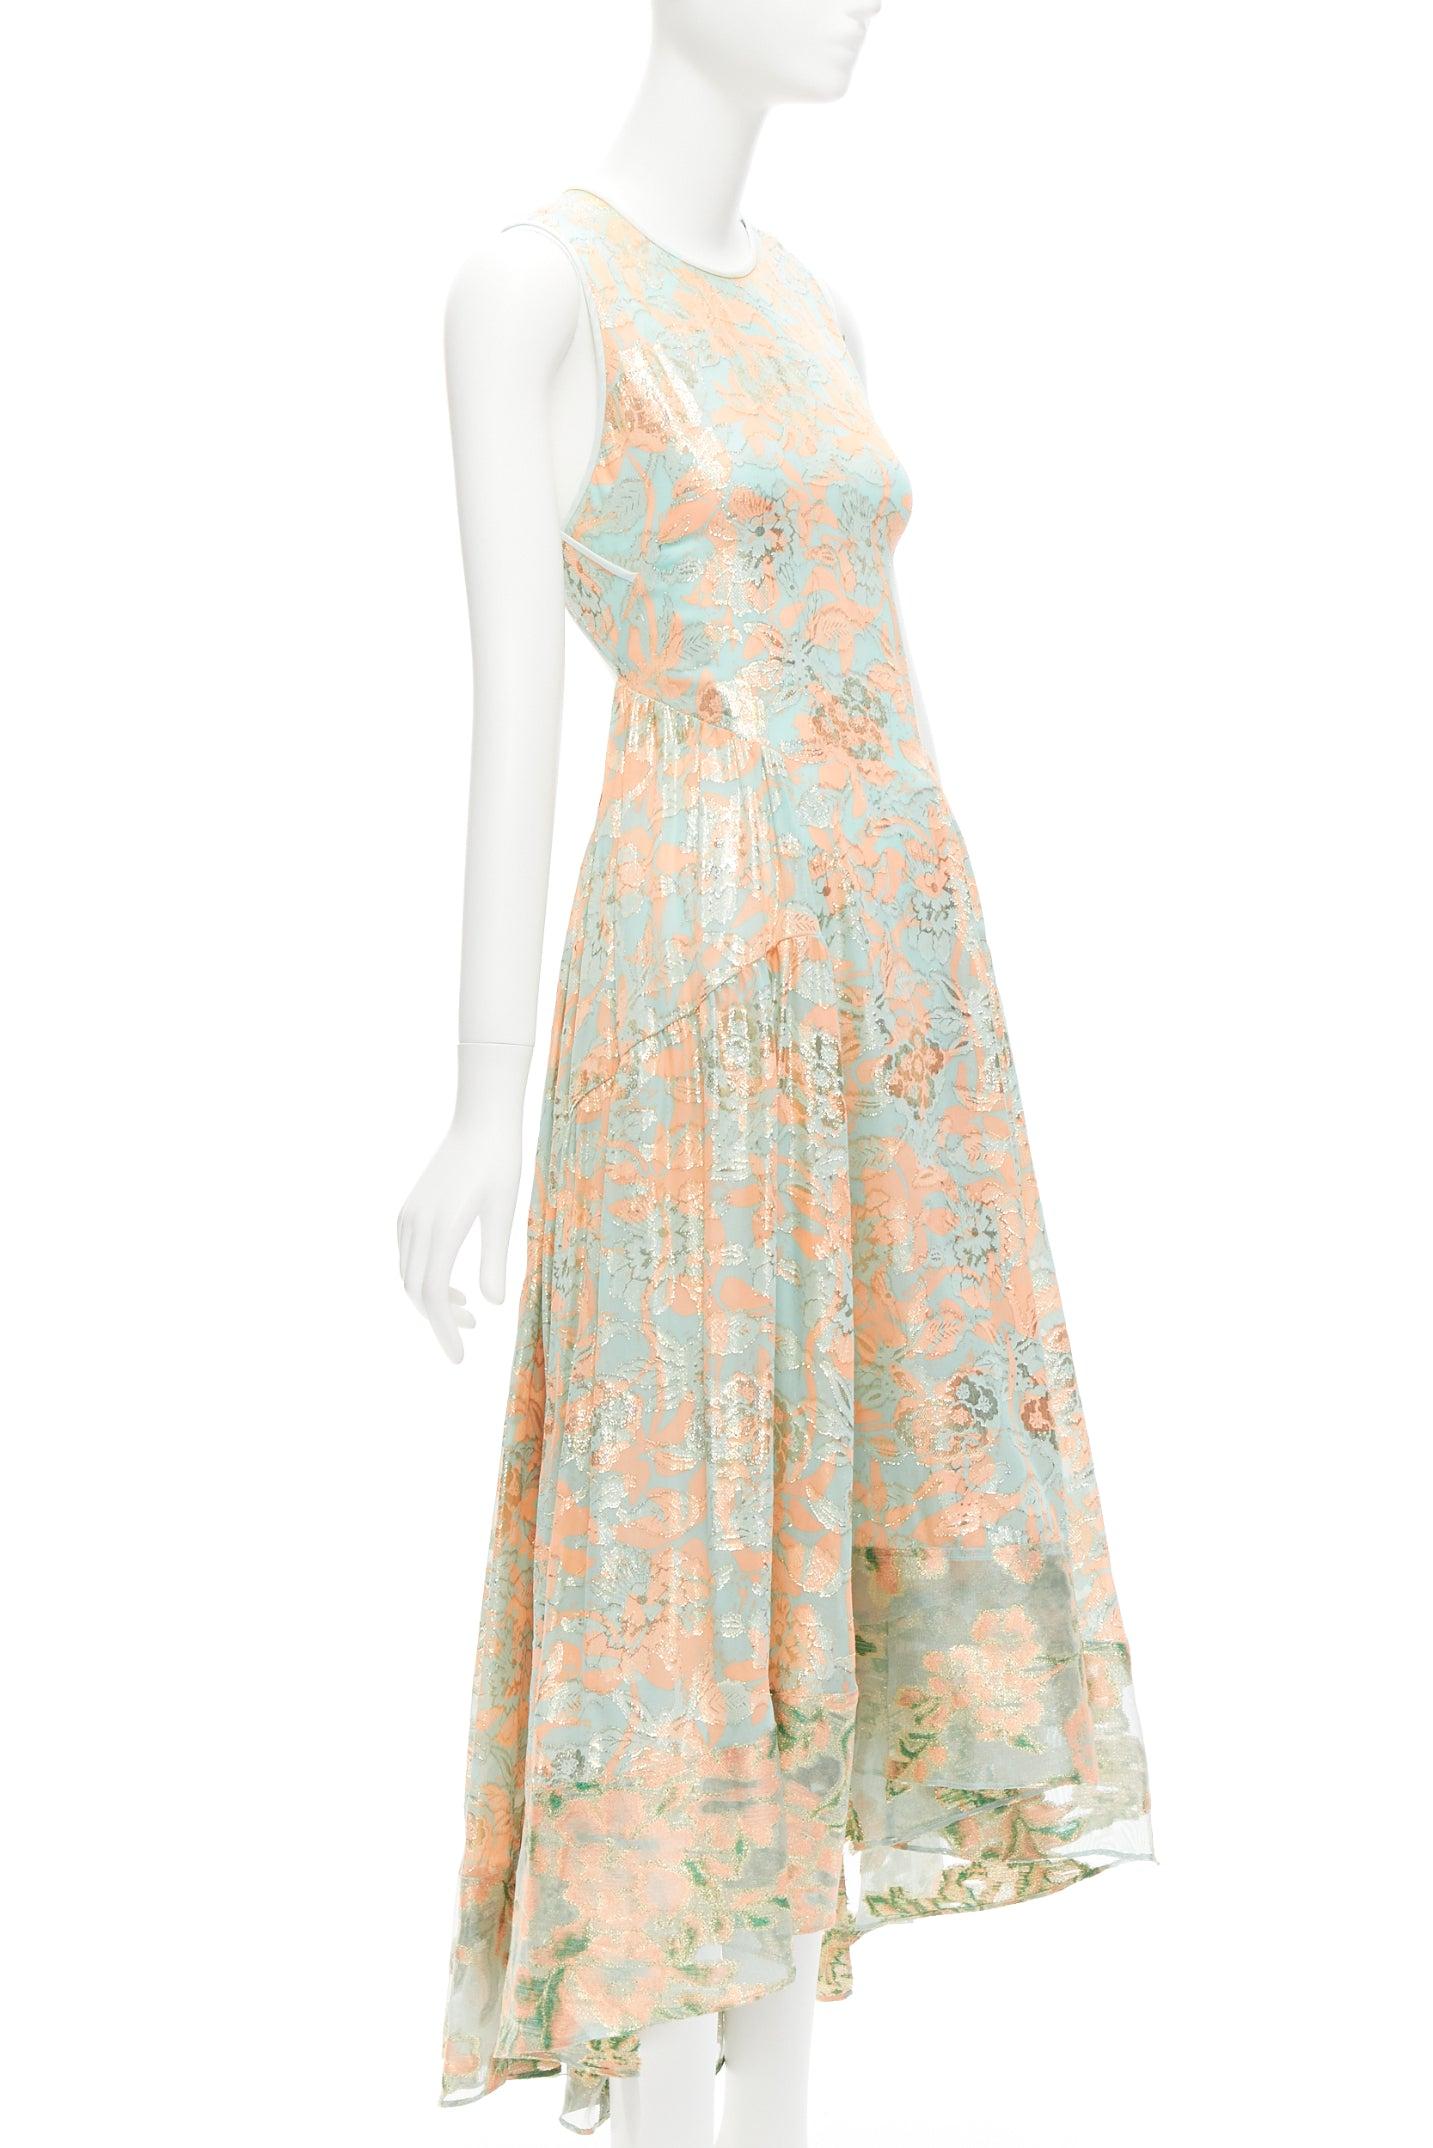 TORY BURCH 2016 Runway mint green pink metallic silk floral lace brocade dress US2 S
Reference: CELG/A00369
Brand: Tory Burch
Collection: Spring 2016 - Runway
Material: Silk, Blend
Color: Green, Pink
Pattern: Brocade
Closure: Zip
Lining: Green